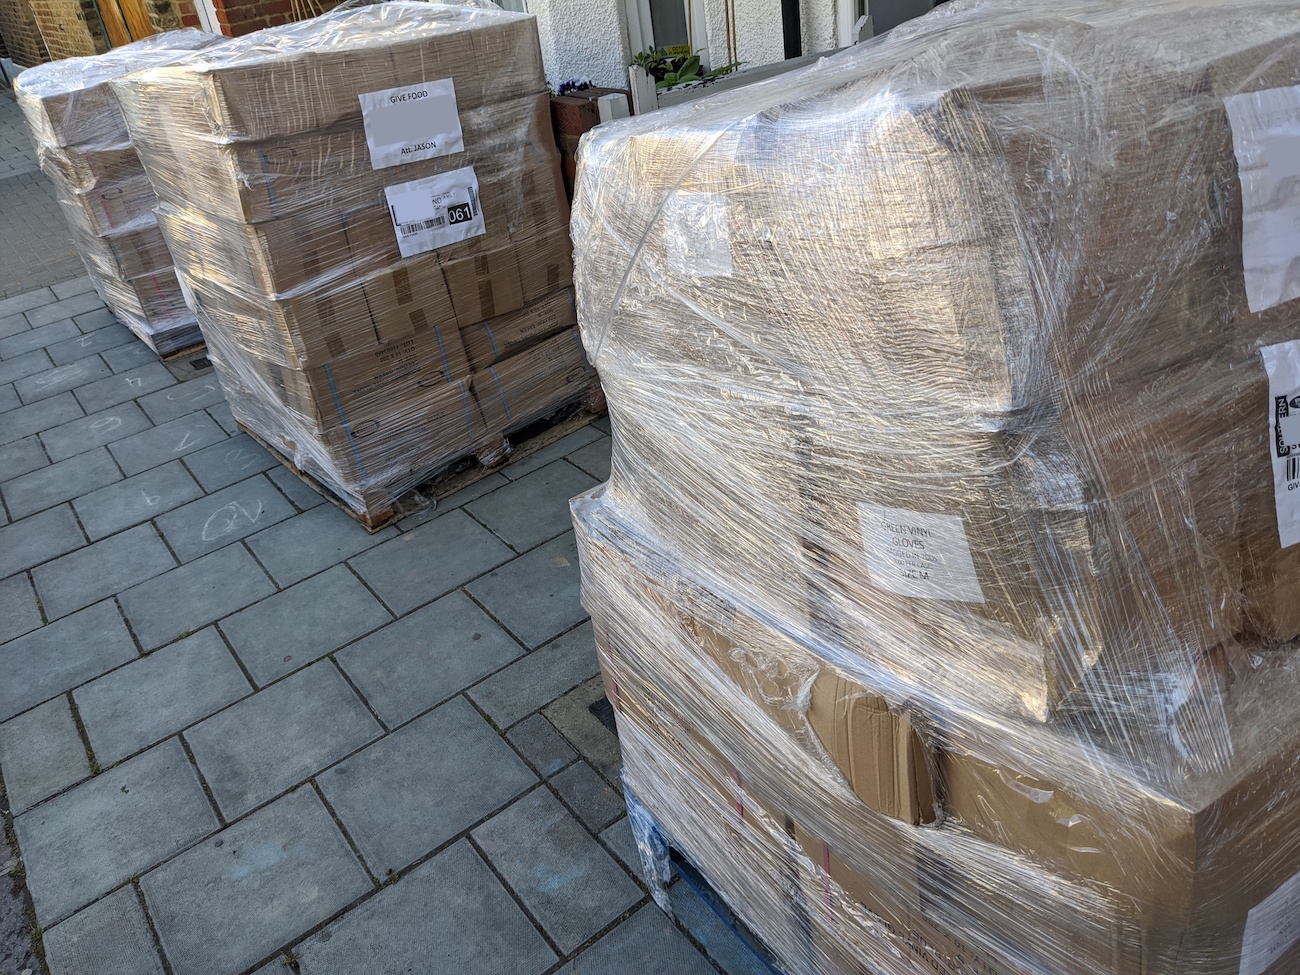 Pallets of cartons of gloves